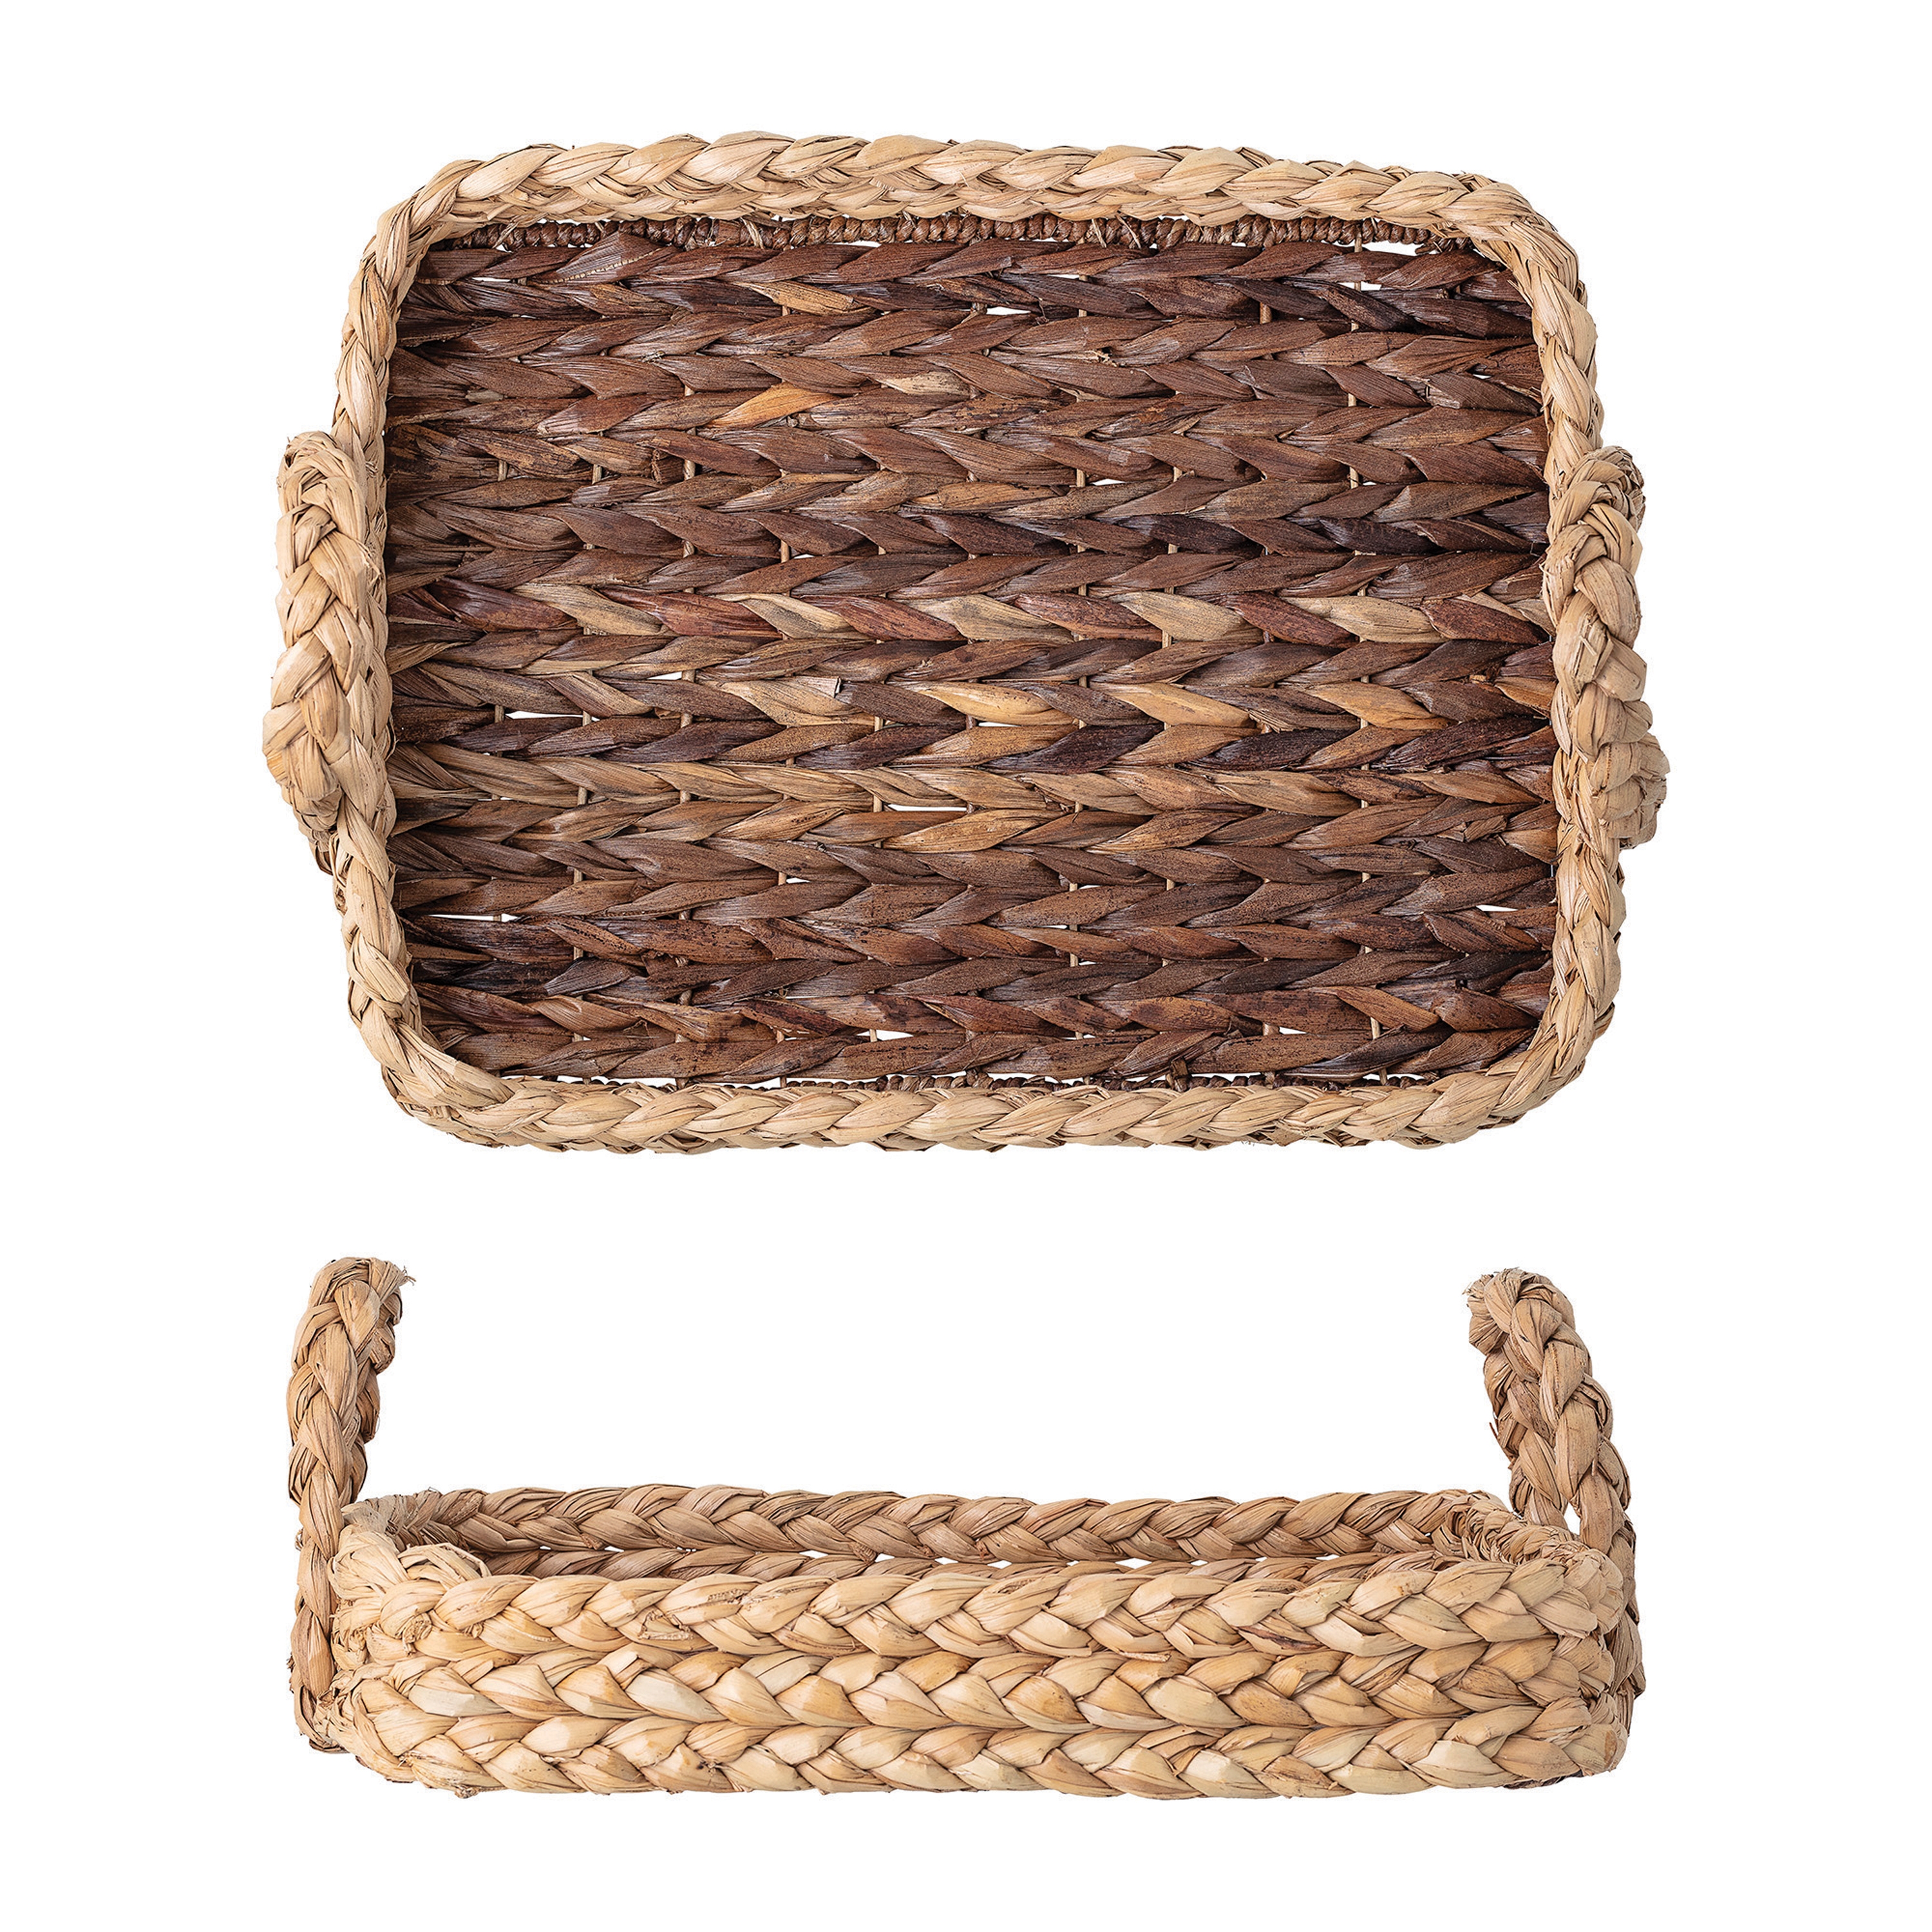 Decorative Handwoven Seagrass Tray with Handles - Image 0